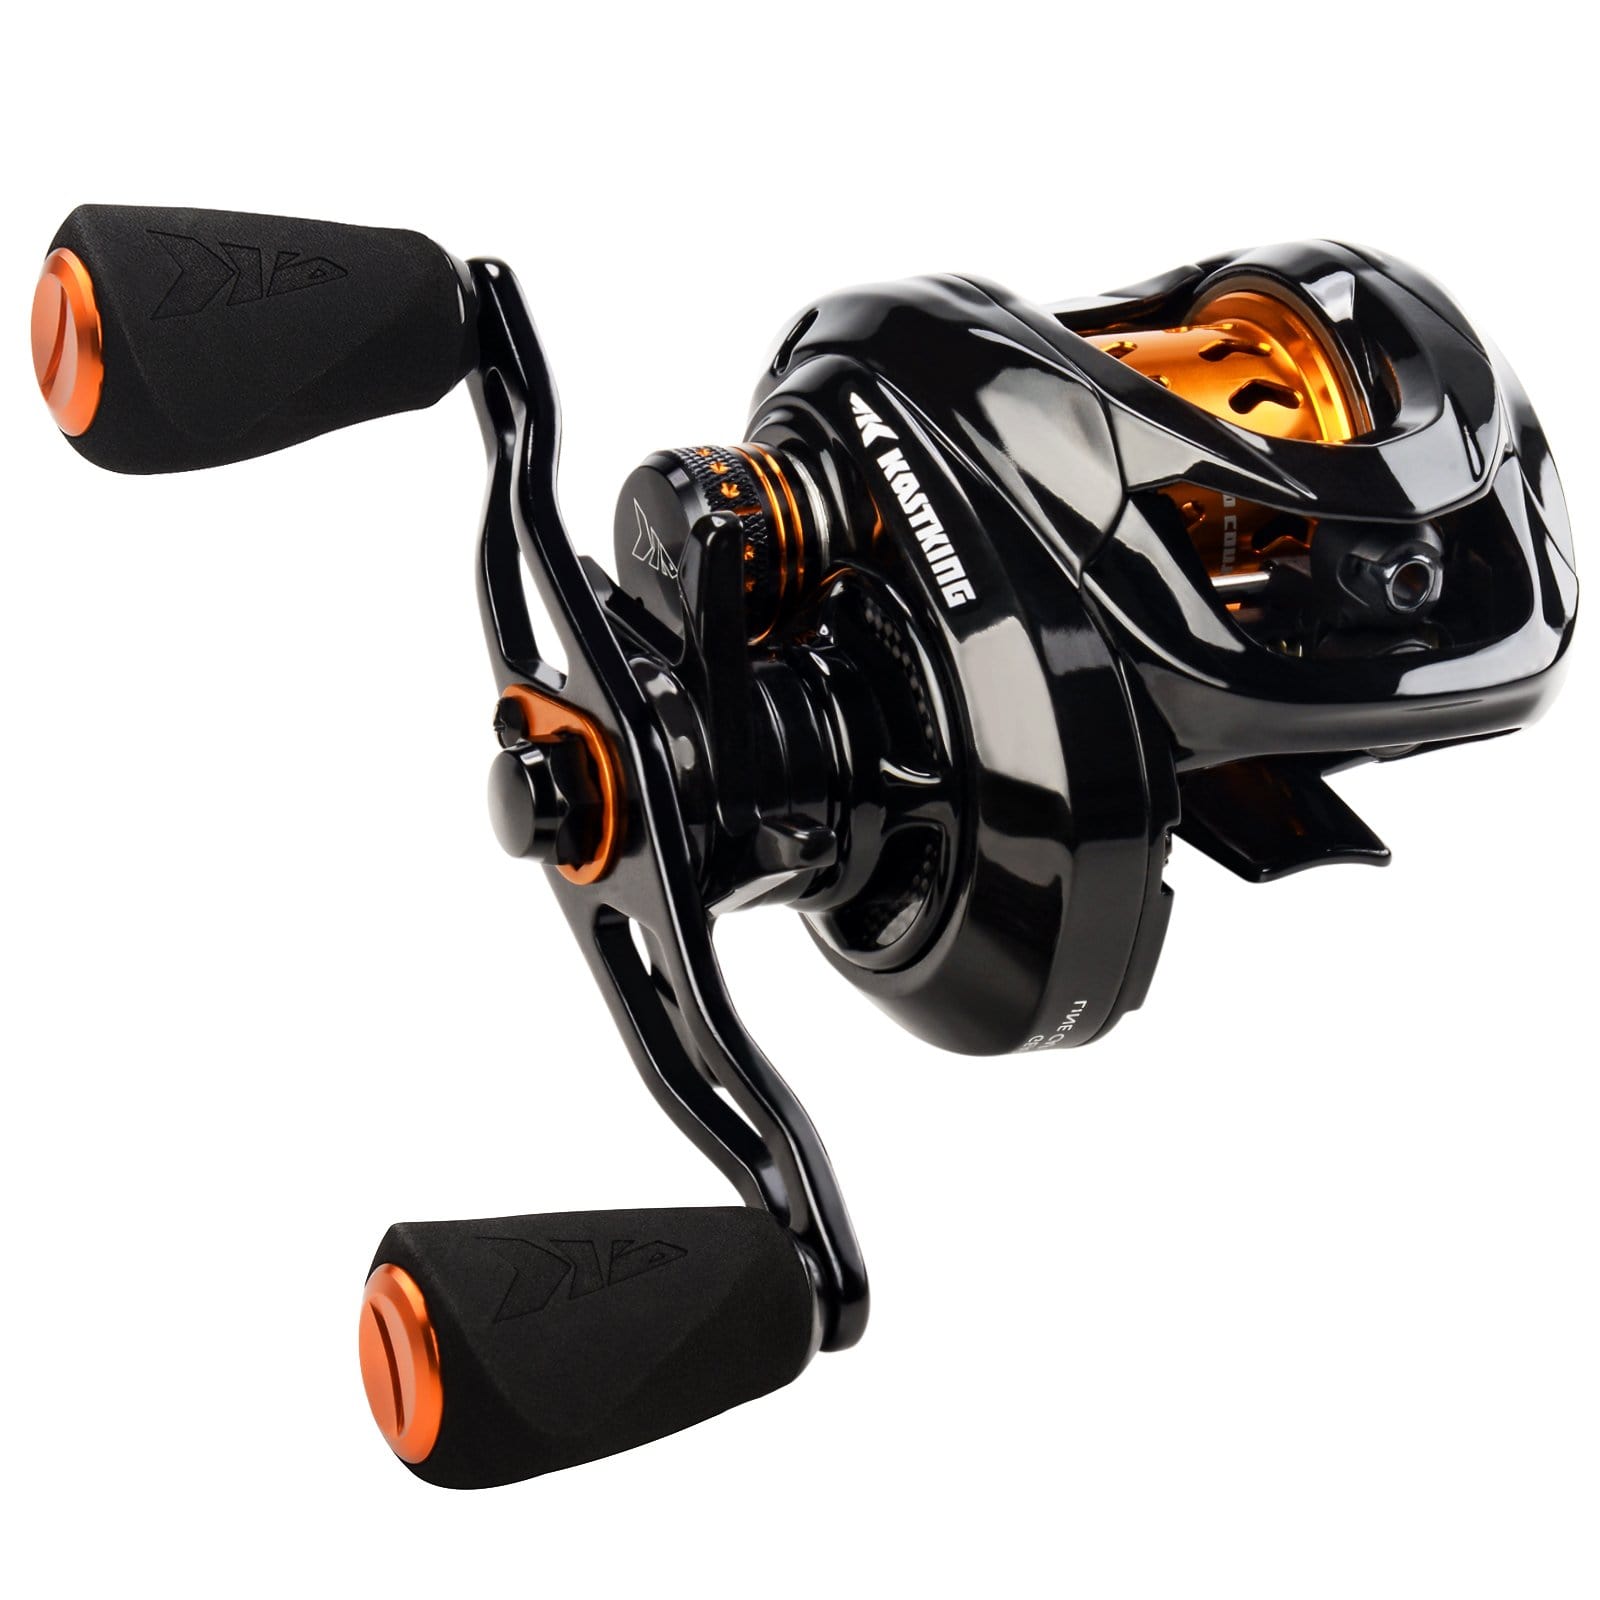 The Fastest Baitcasting Reels — Half Past First Cast